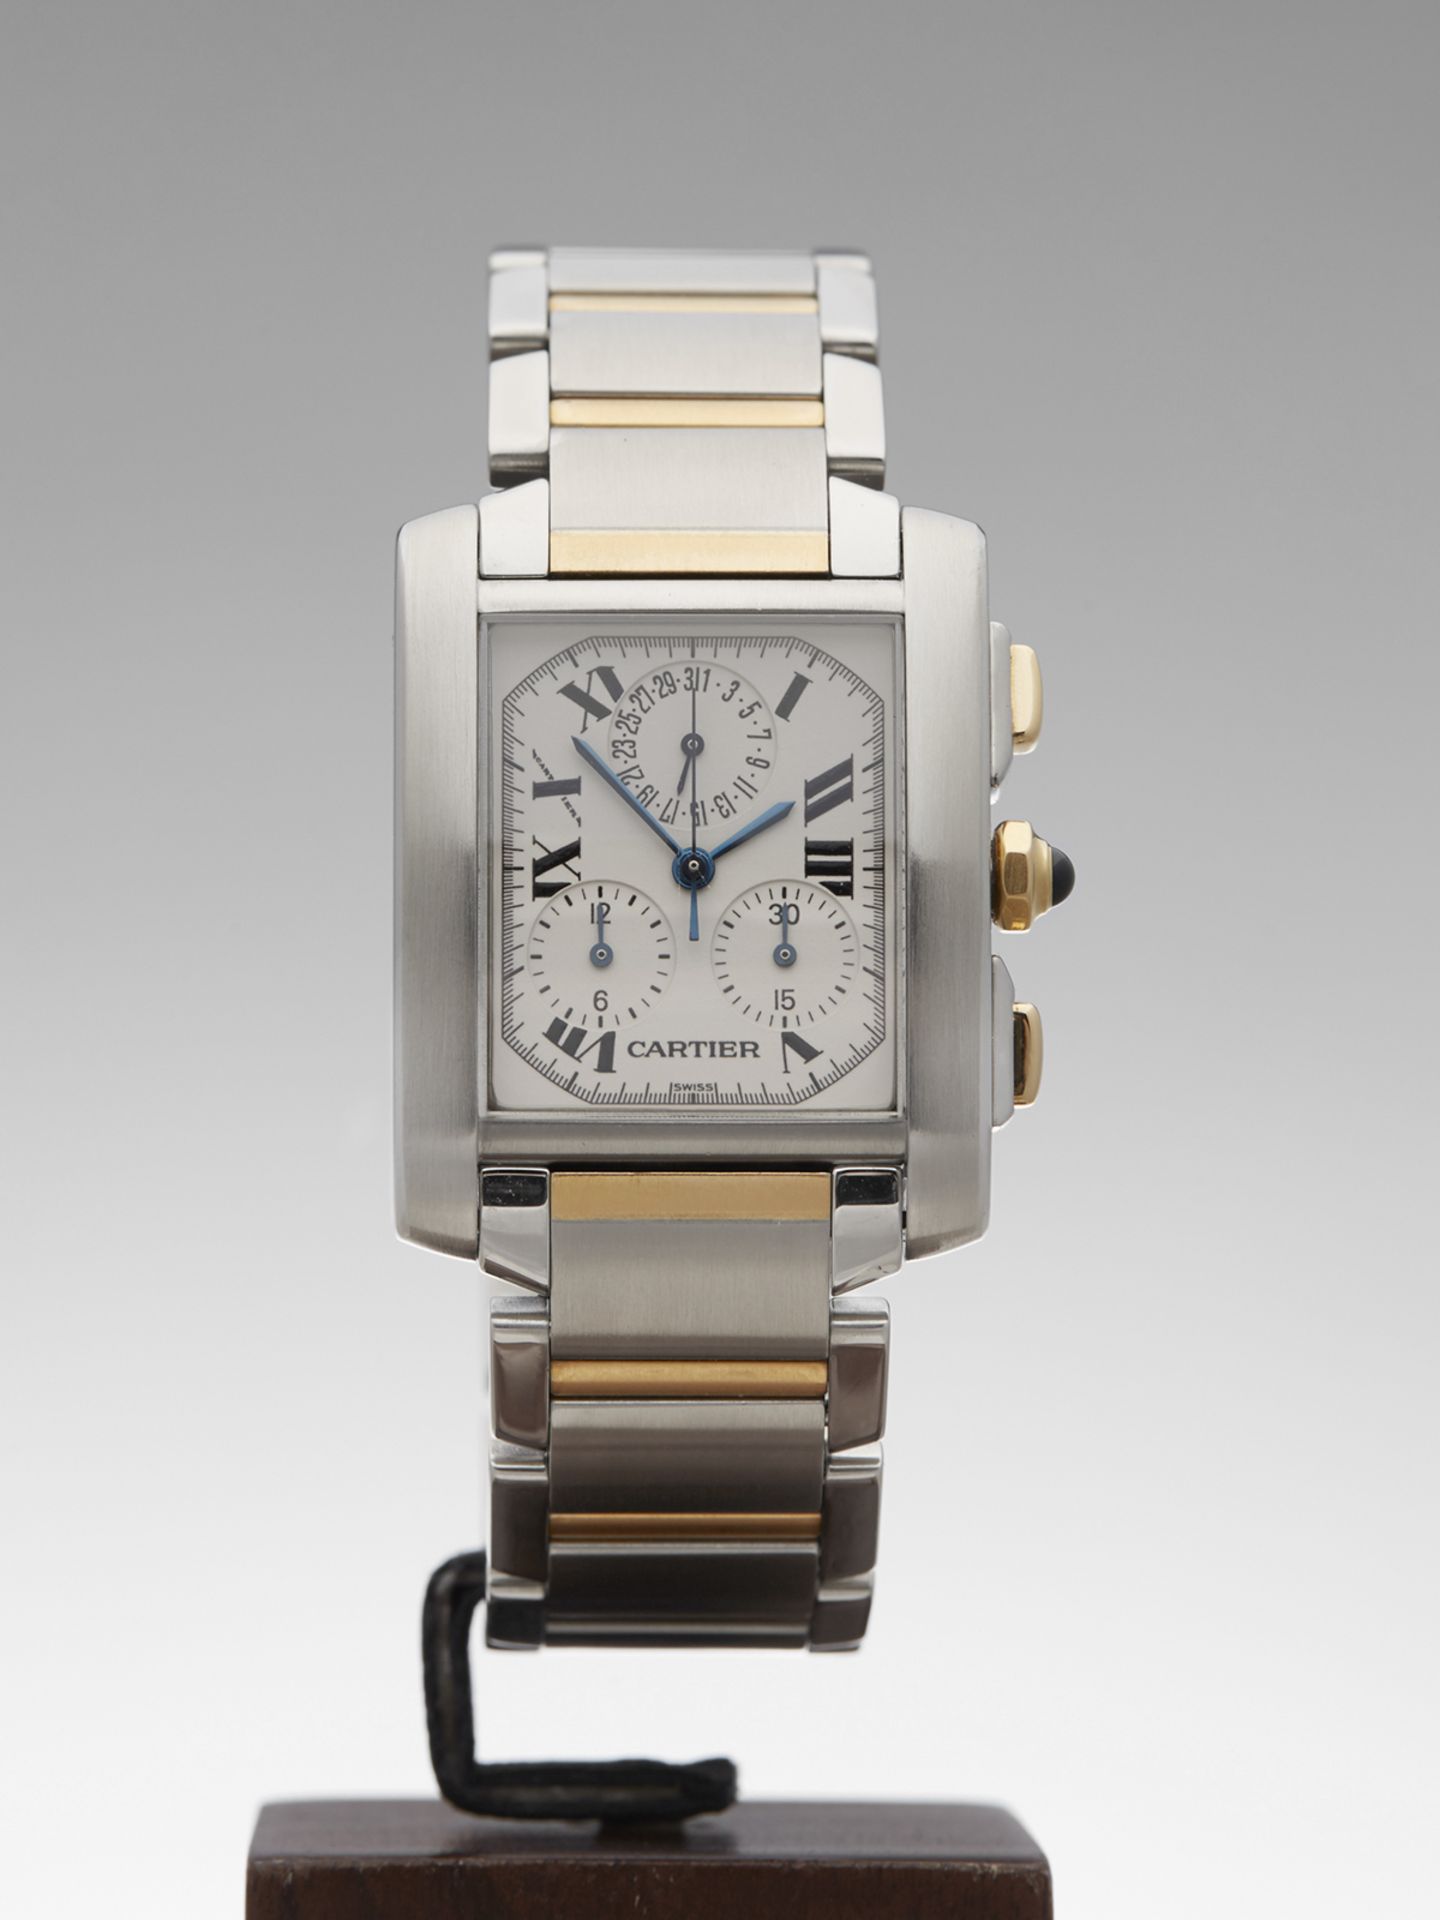 Cartier Tank Francaise Chronoreflex 28mm Stainless Steel & 18k Yellow Gold 2303 or W51004Q4 - Image 3 of 10